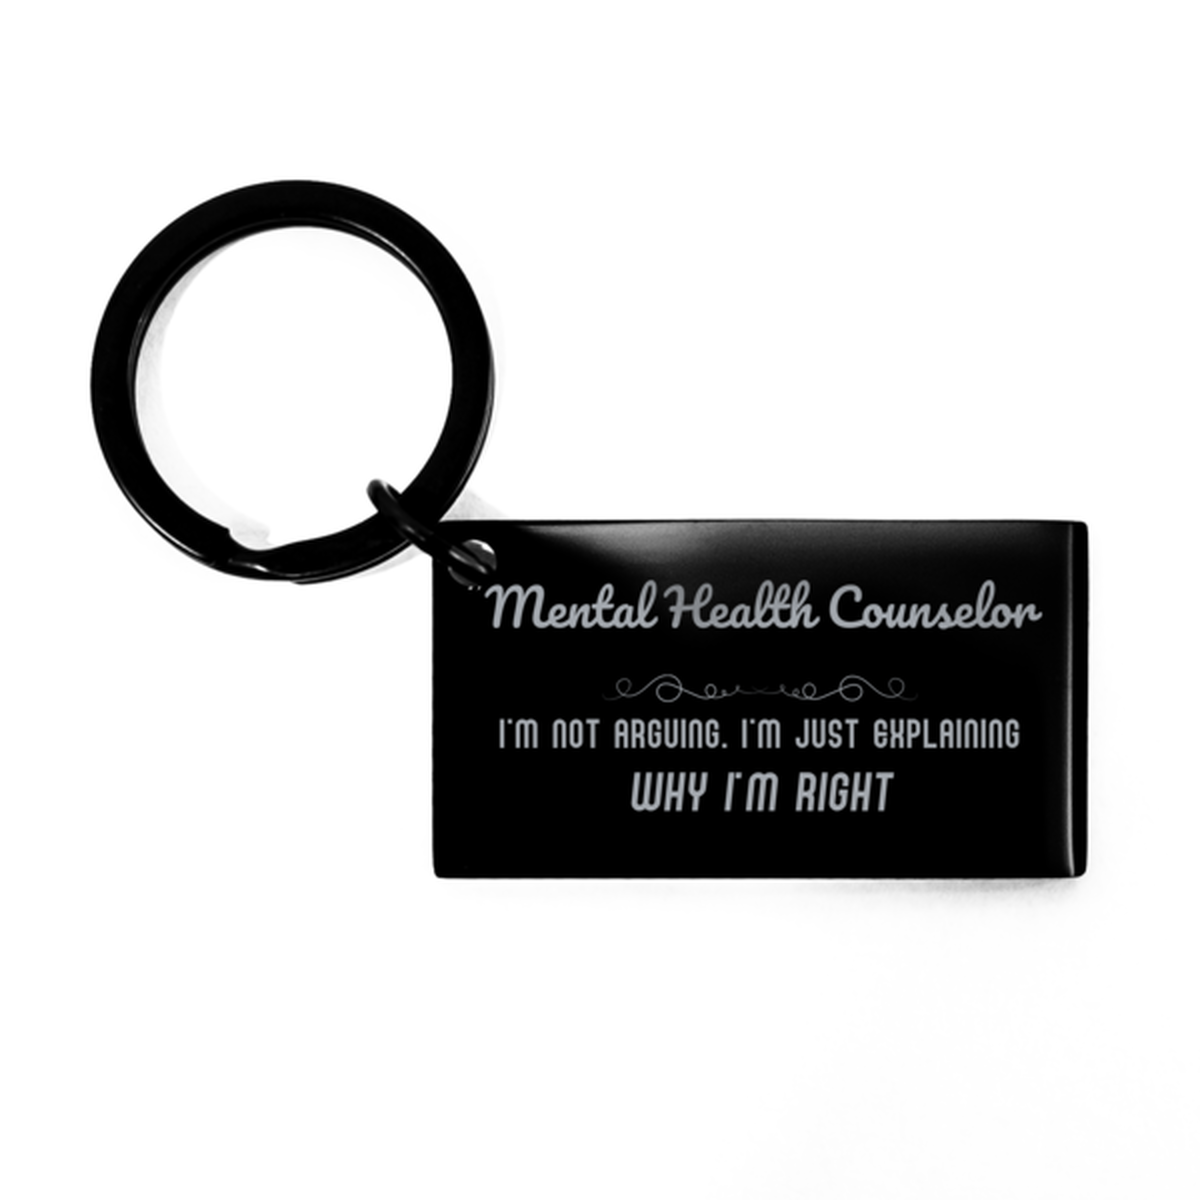 Mental Health Counselor I'm not Arguing. I'm Just Explaining Why I'm RIGHT Keychain, Funny Saying Quote Mental Health Counselor Gifts For Mental Health Counselor Graduation Birthday Christmas Gifts for Men Women Coworker